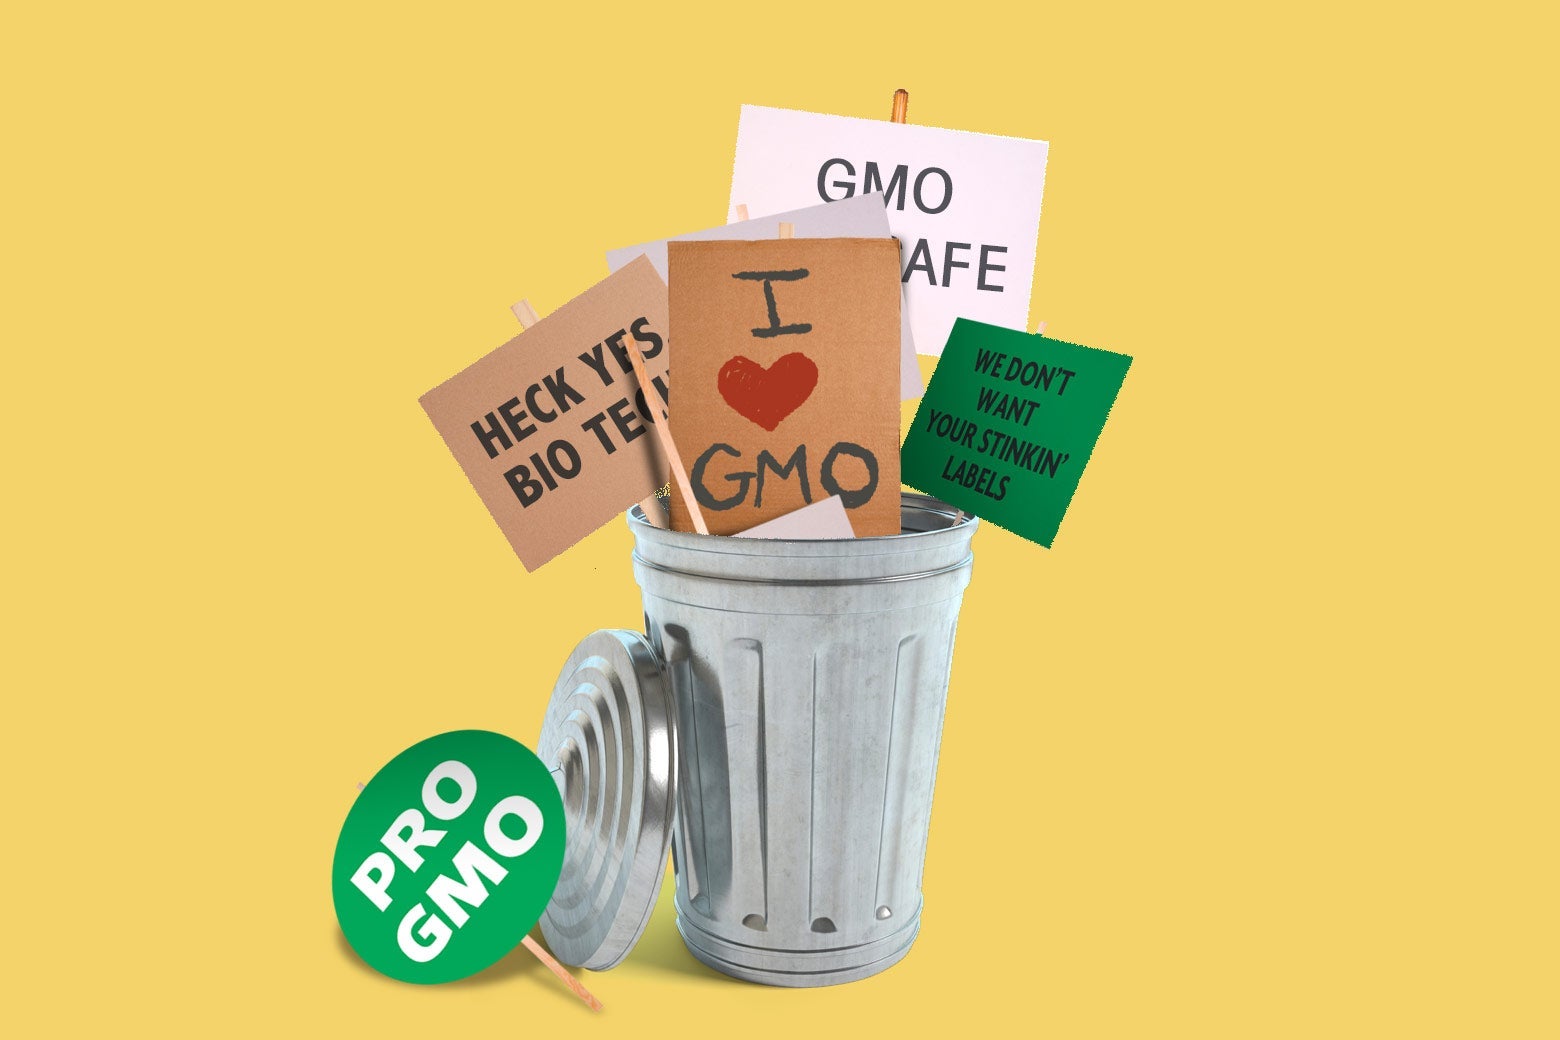 Pro-GMO signs are seen in a trash can.